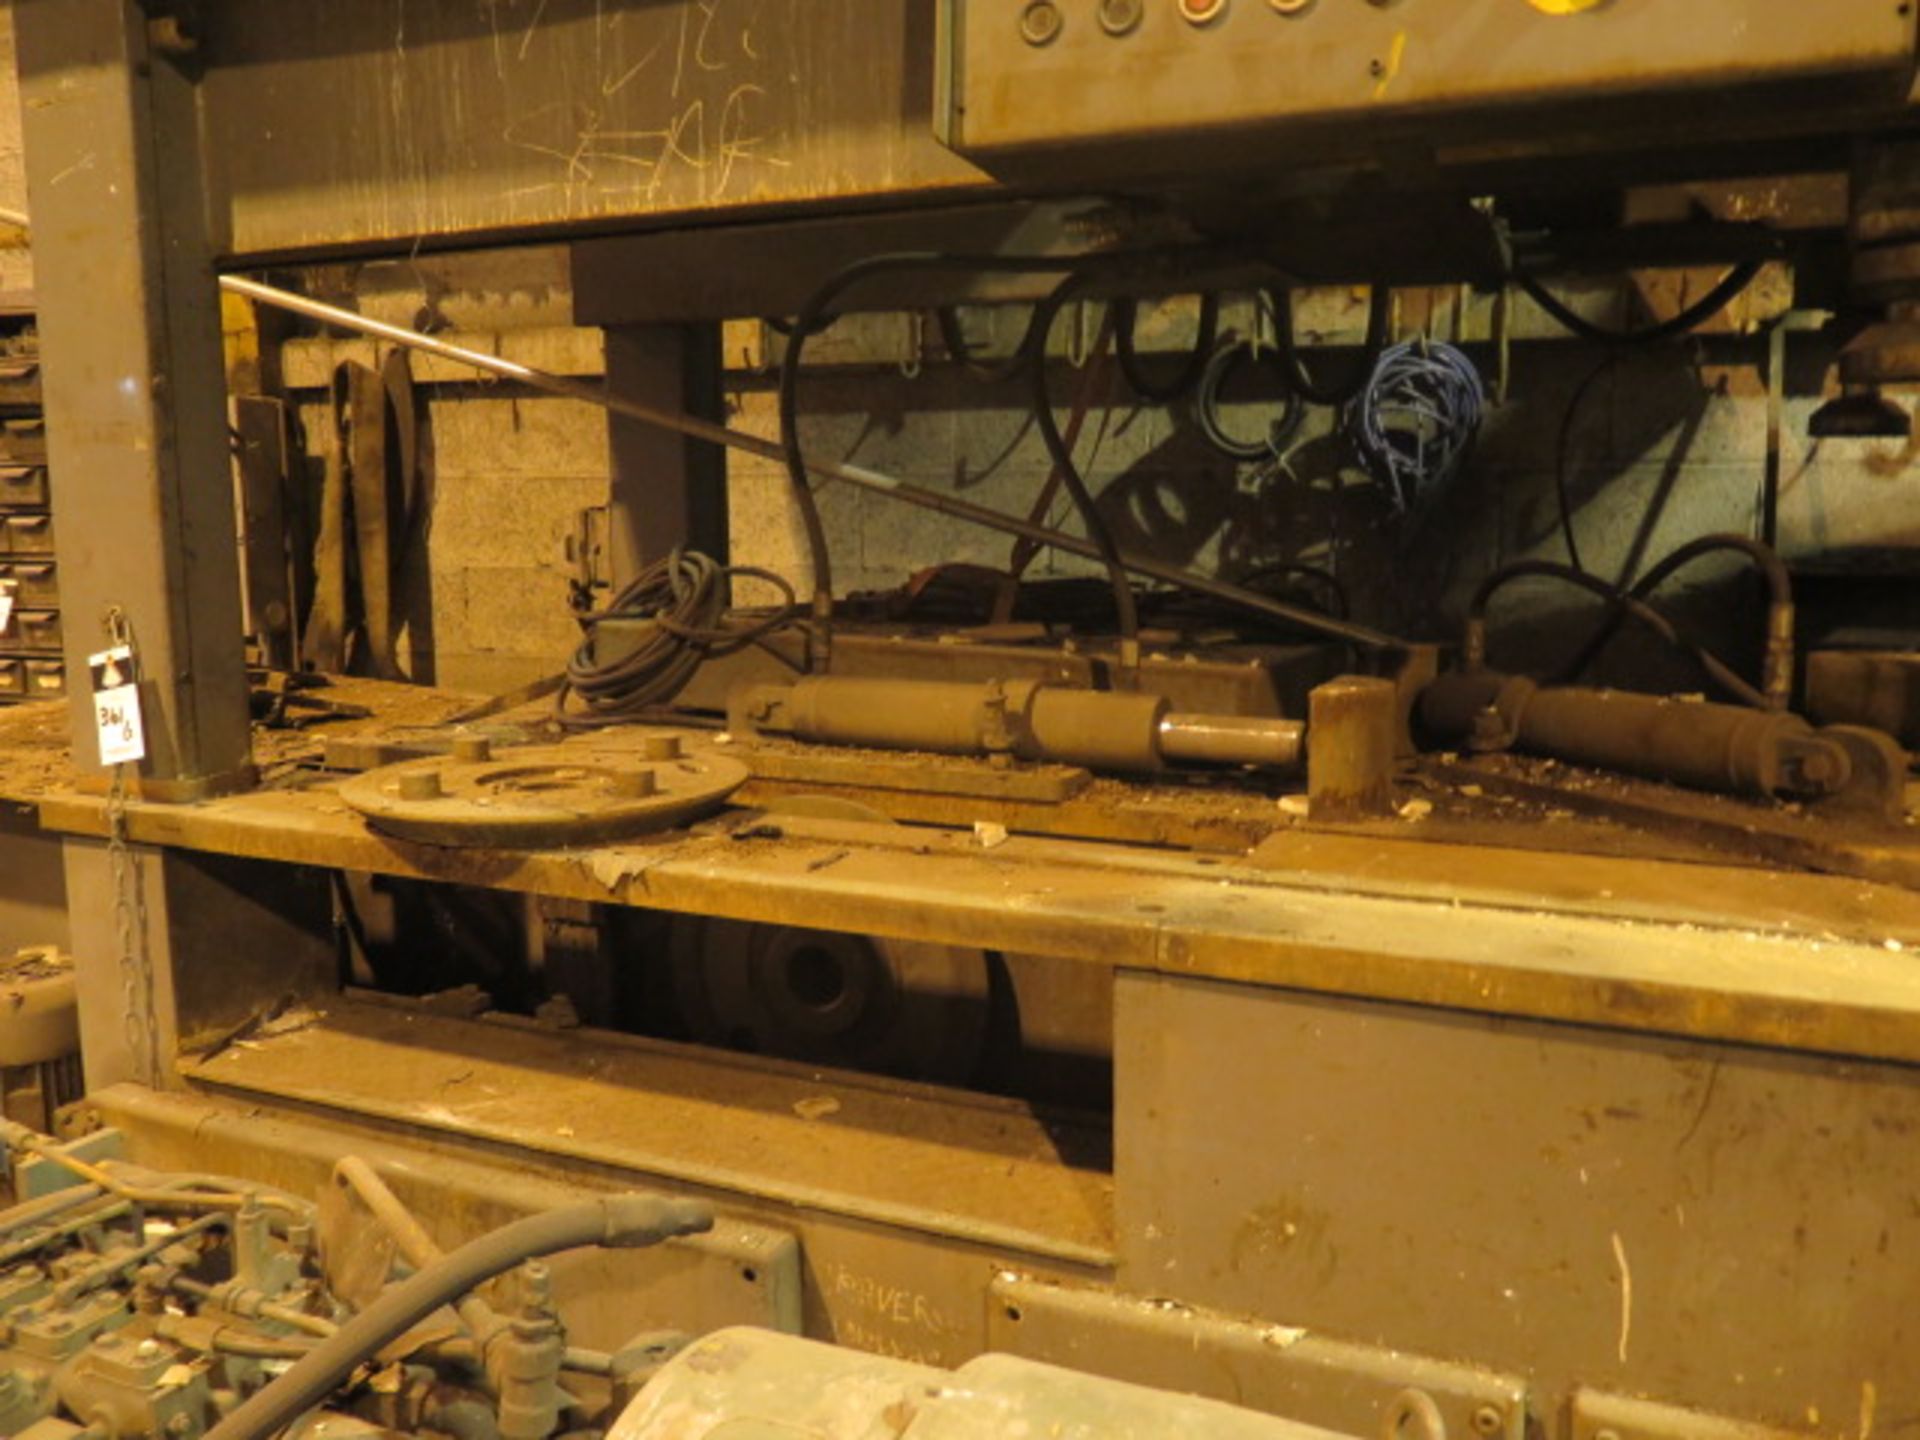 Trennjaeger mdl. LKH 420/1000 Hydraulic Miter Cold Beam Saw w/ 20” Height Cap, 56” Saw Blade, - Image 2 of 5